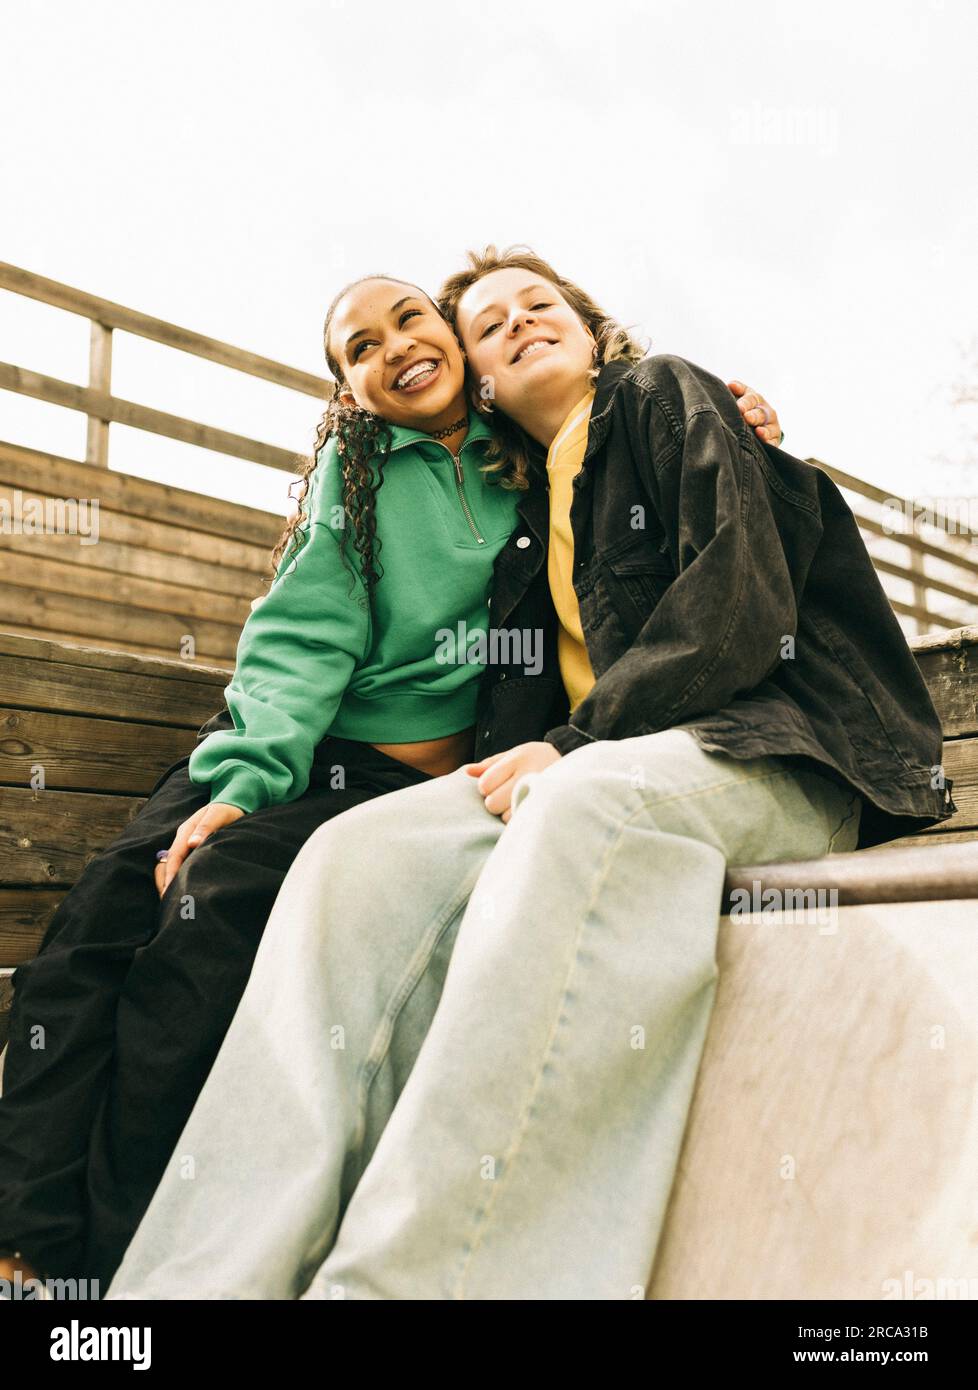 Smiling young woman embracing female friend while sitting on steps Stock Photo